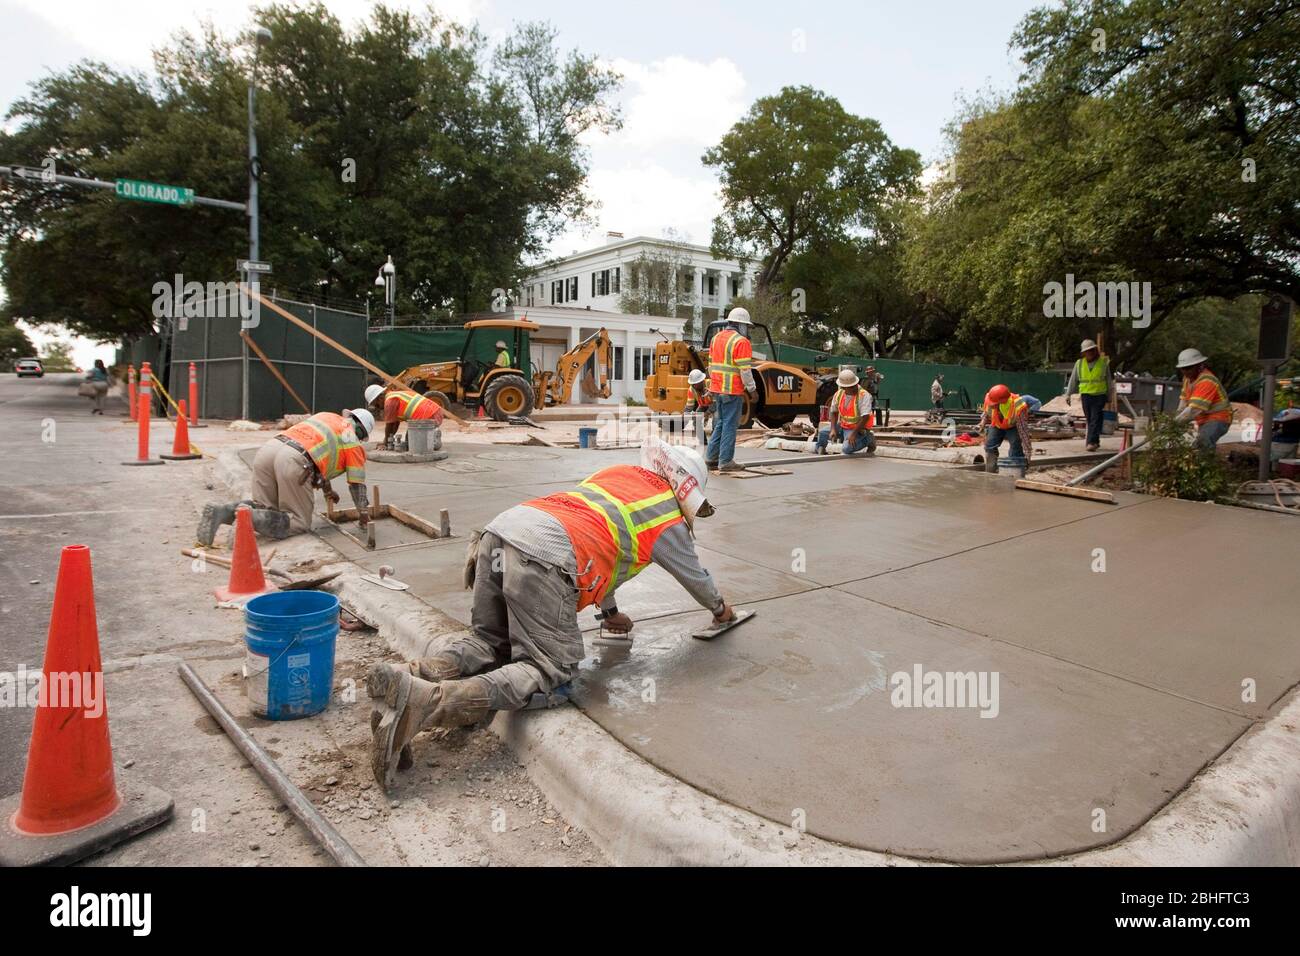 Austin Texas USA, 2012: Group of mostly Hispanic male workers complete concrete sidewalk in front of Texas Governor's Mansion in downtown Austin.  ©Marjorie Kamys Cotera/Daemmrich Photography Stock Photo